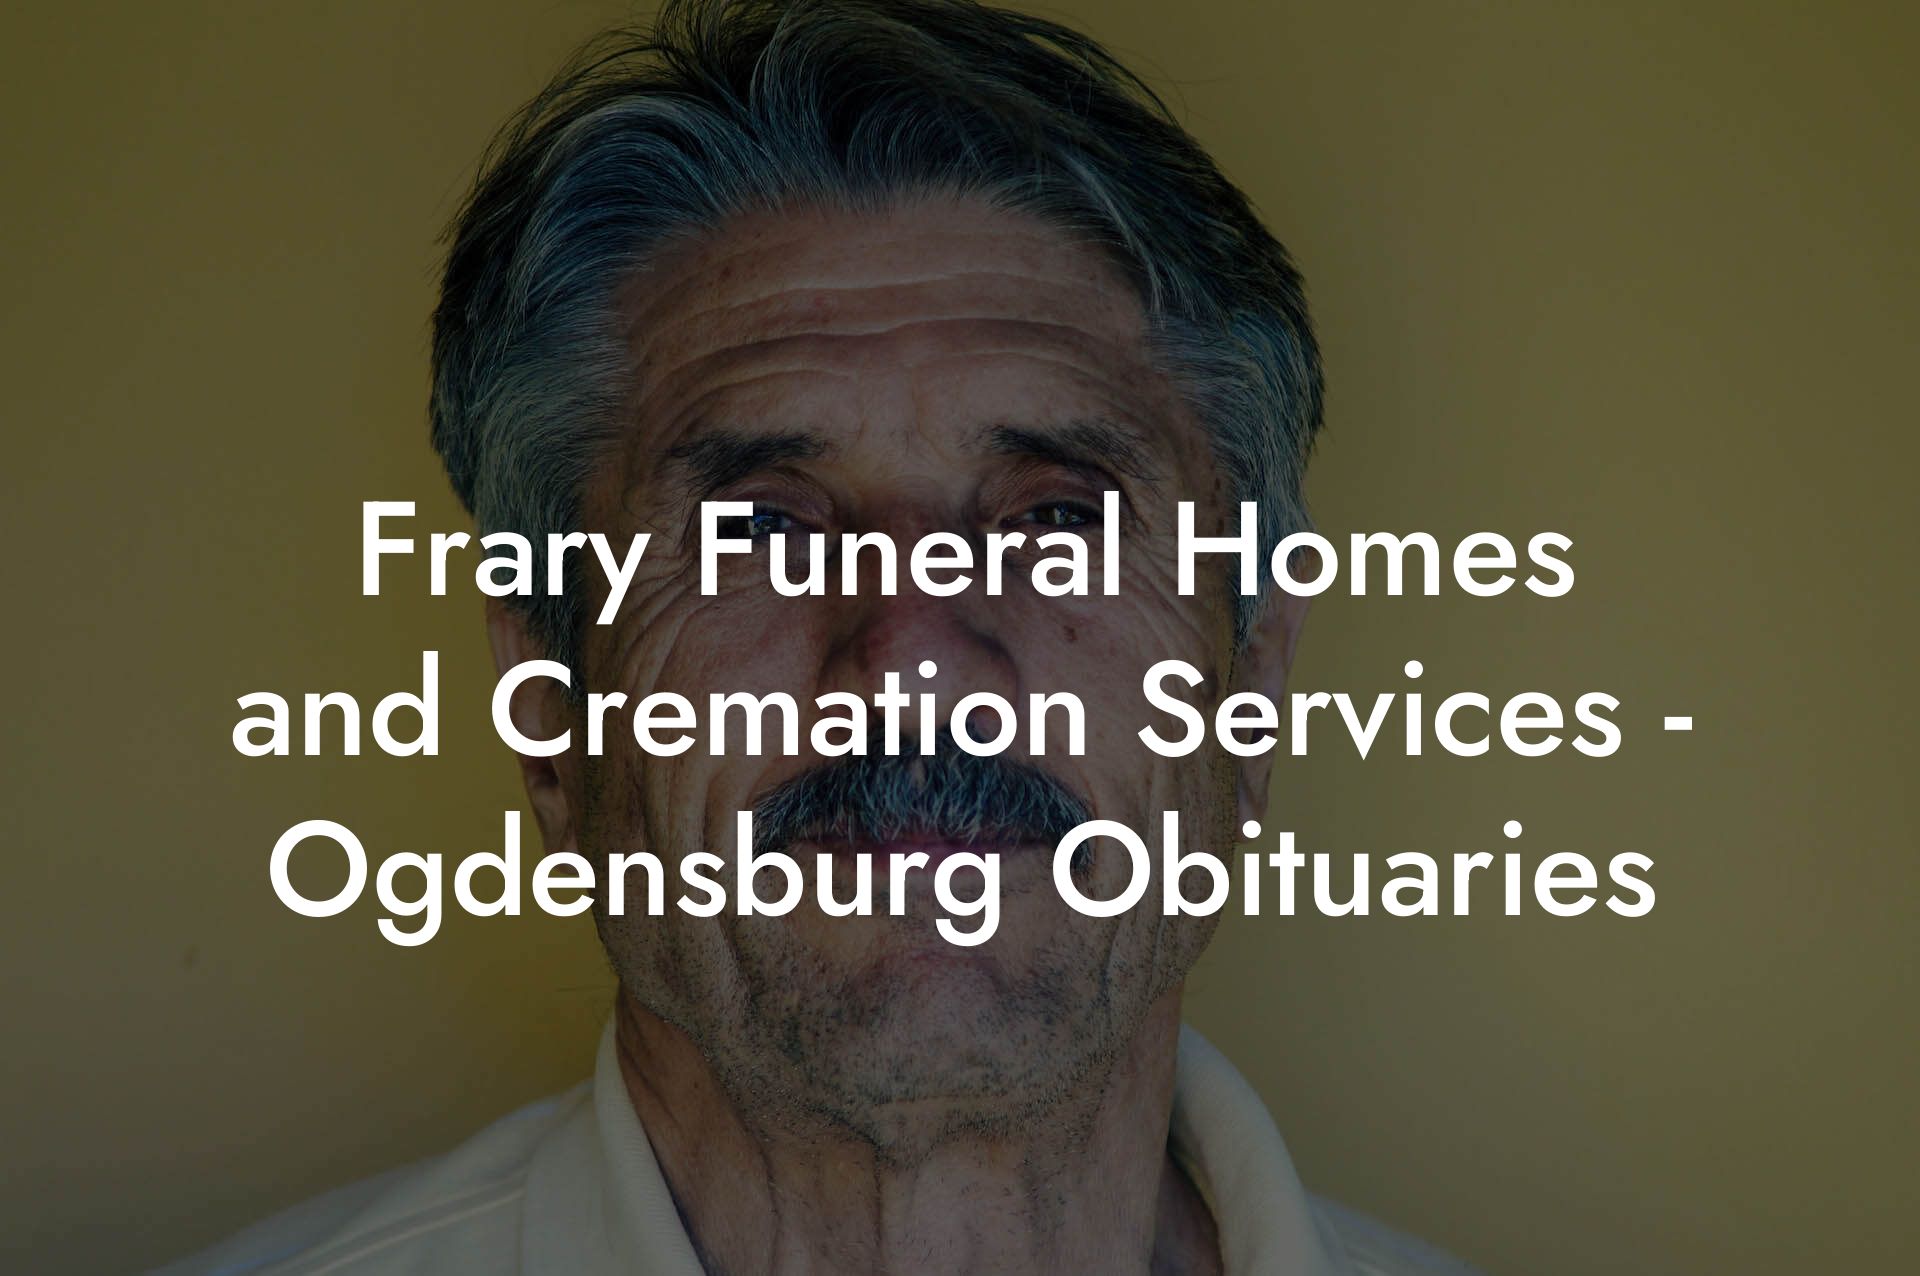 Frary Funeral Homes and Cremation Services - Ogdensburg Obituaries